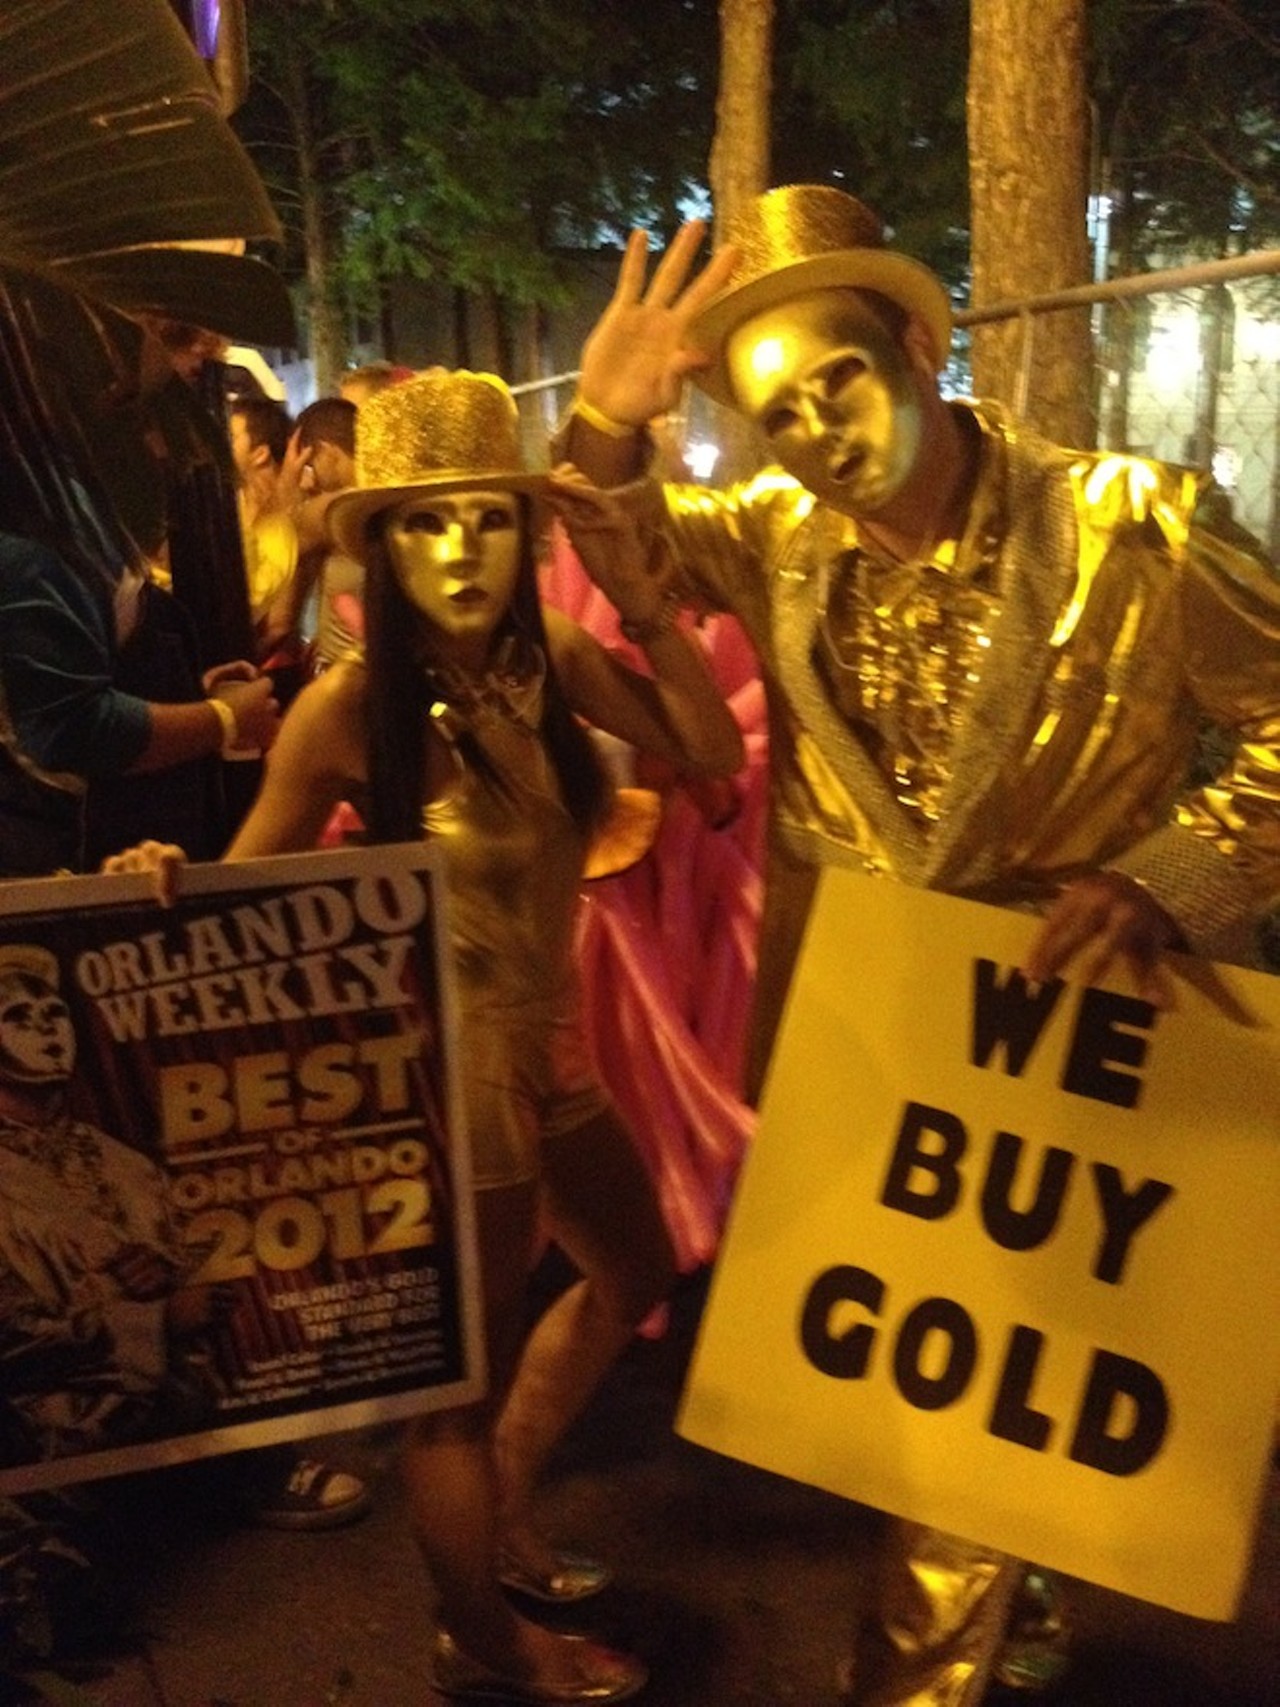 People dressed as Mr. Gold at Wall St. Plaza's Plazaween